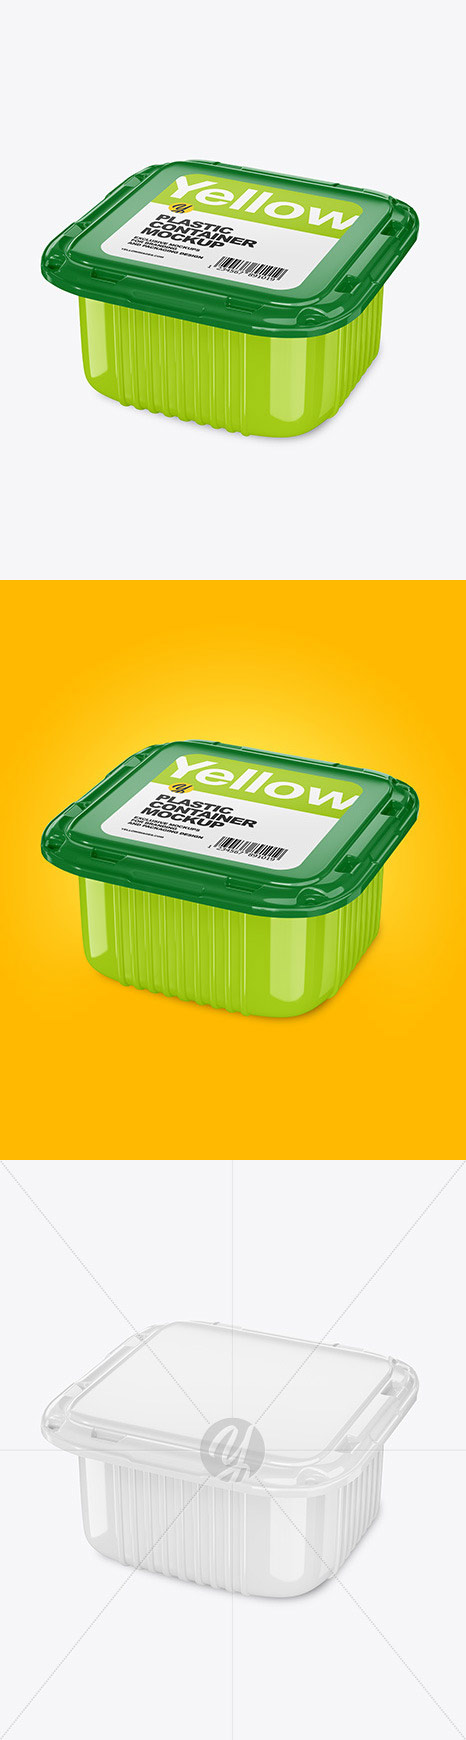 Glossy Plastic Container Mockup 50665